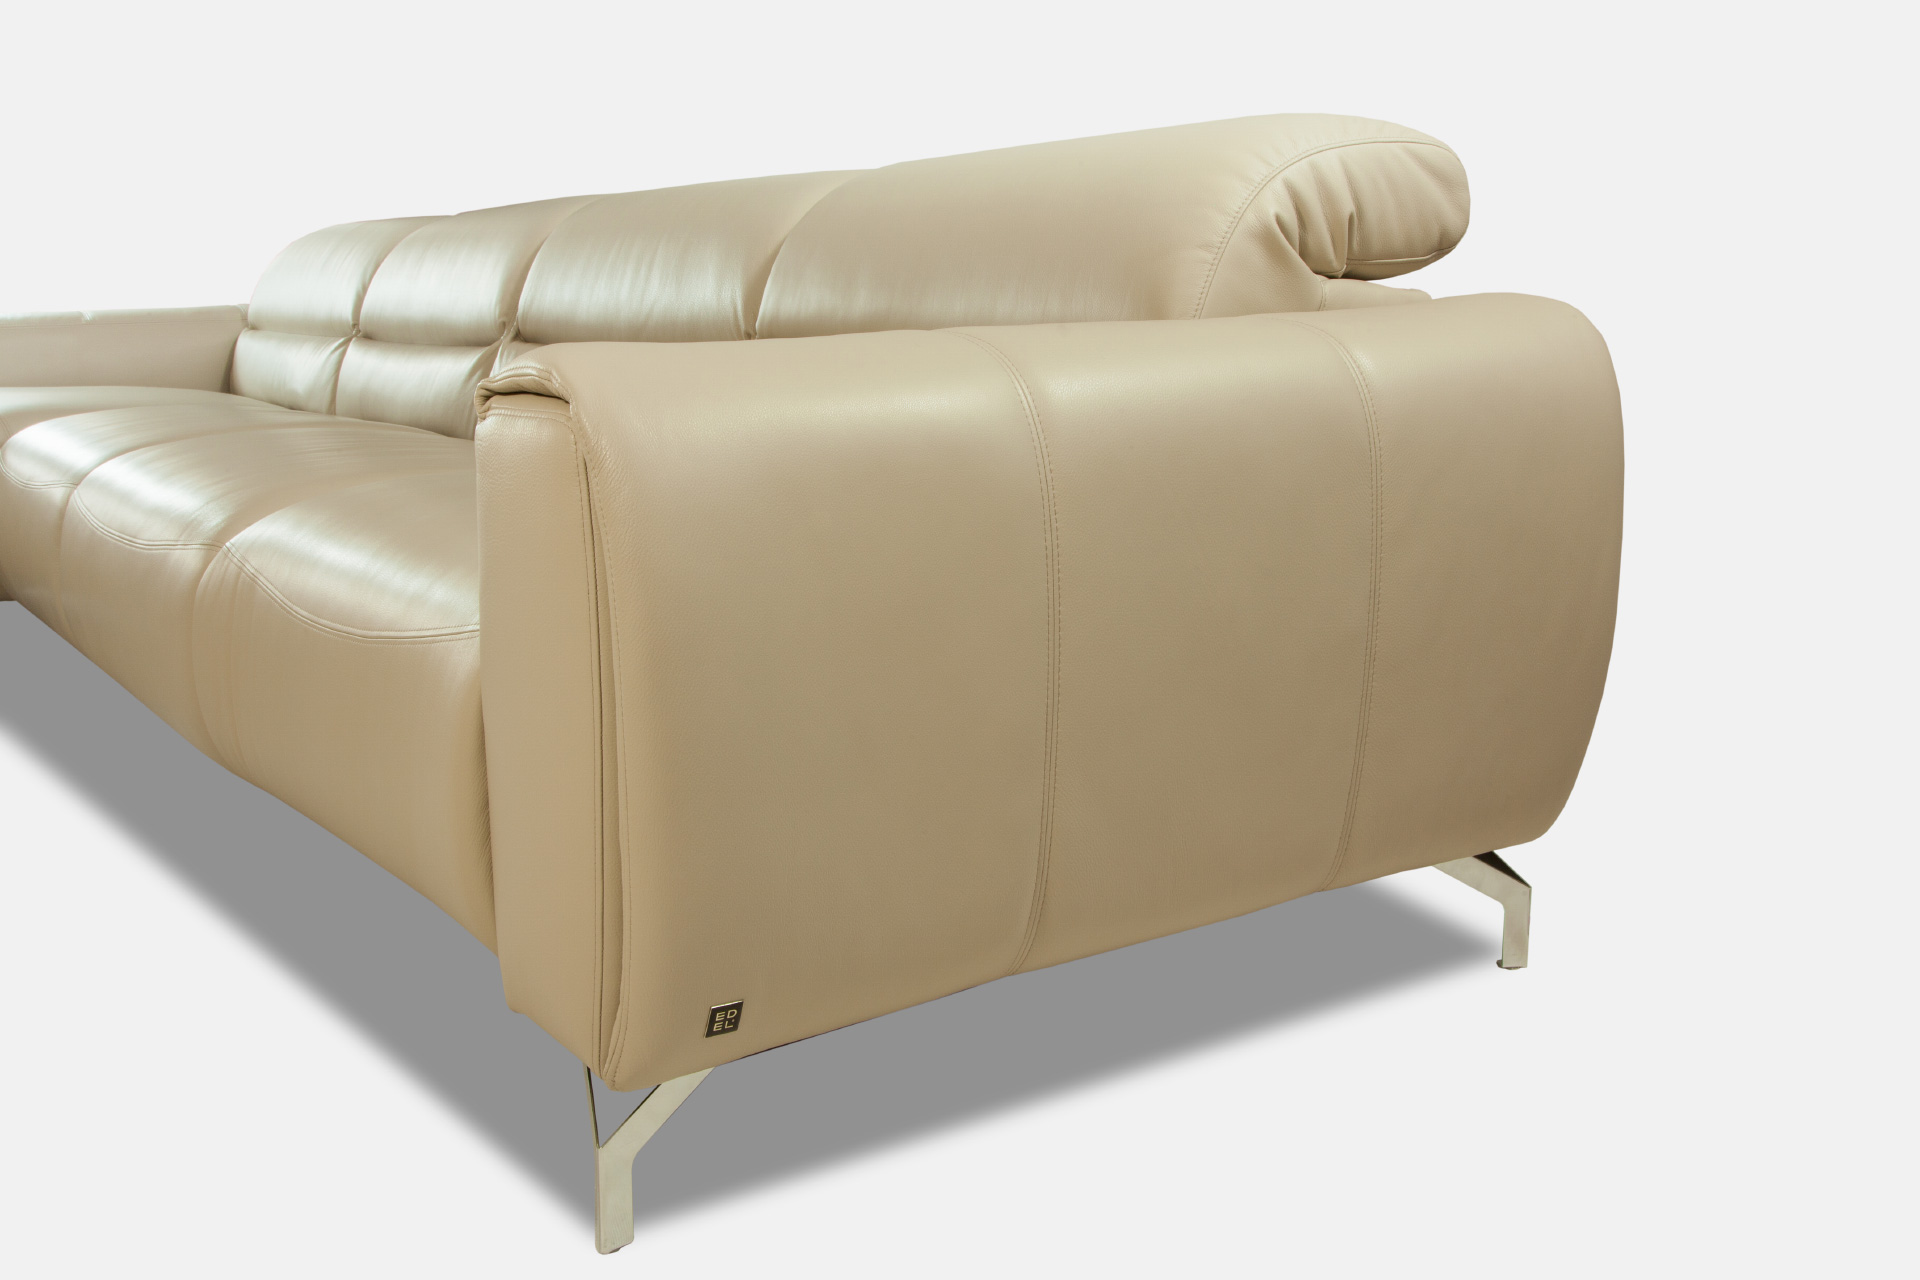 MOVE lounge suite beautiful original shape and many spectacular details